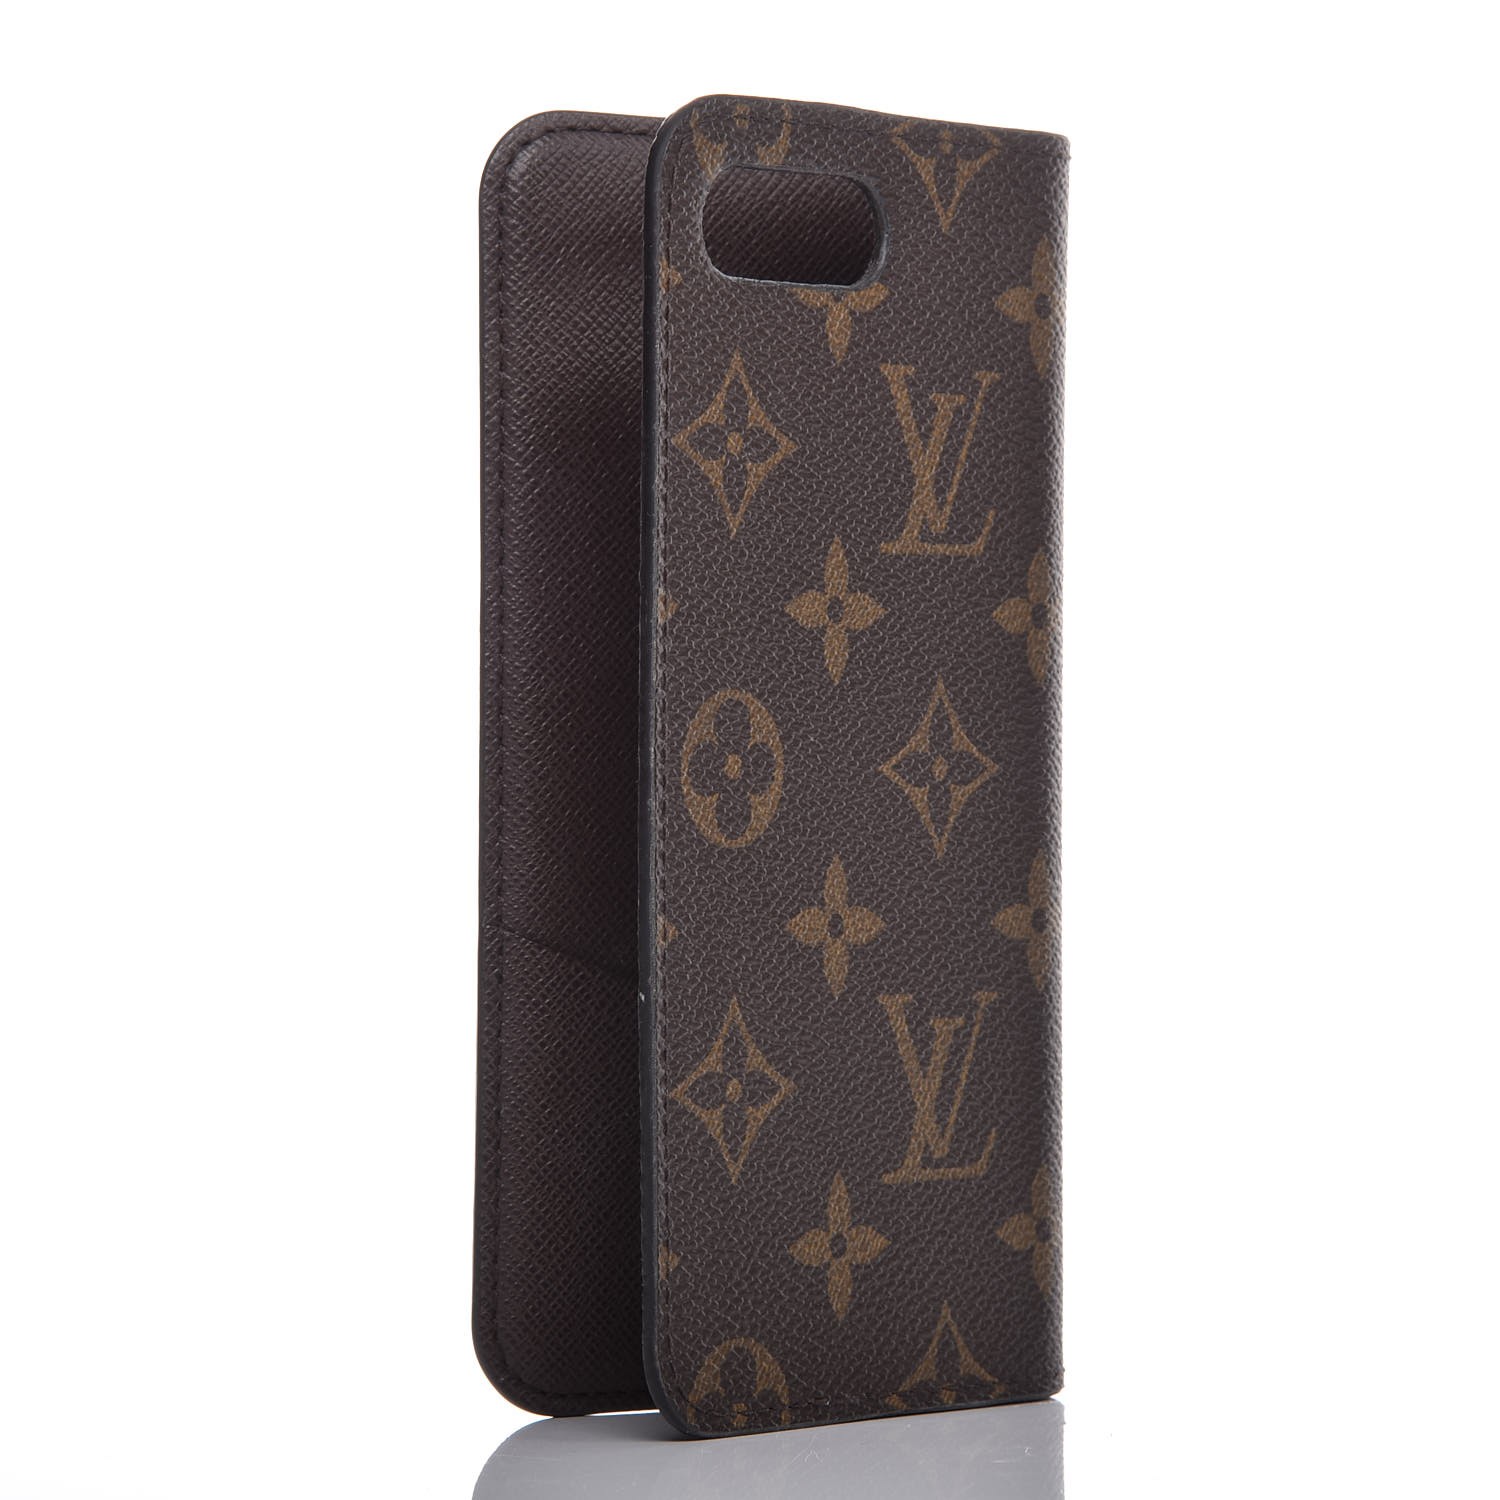 Airpods Cases Louis Vuitton  Natural Resource Department